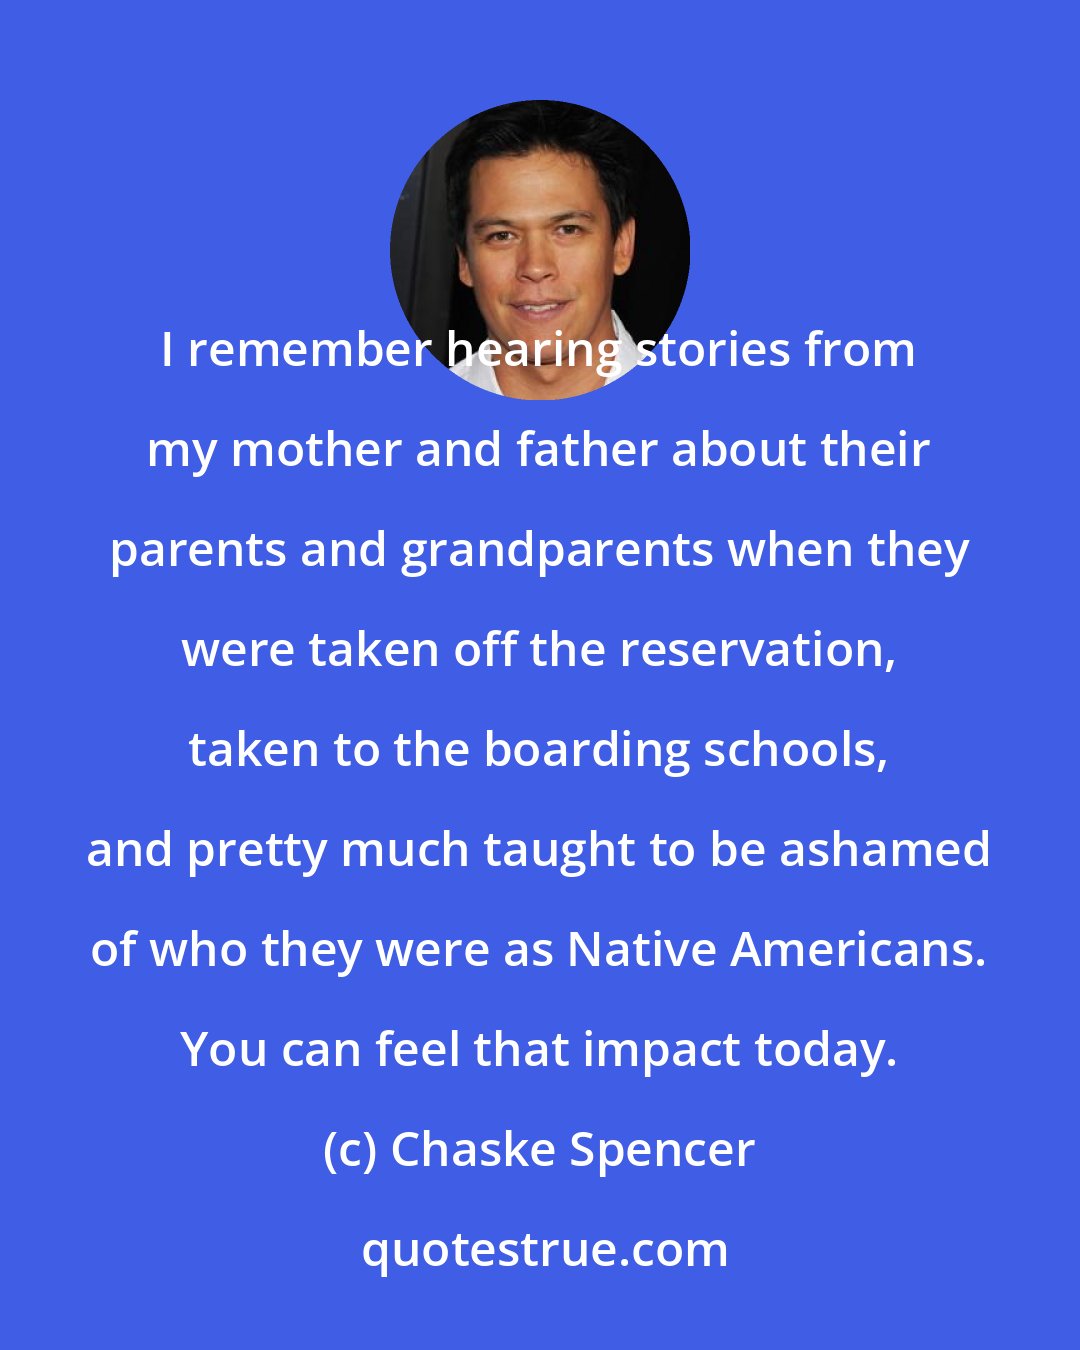 Chaske Spencer: I remember hearing stories from my mother and father about their parents and grandparents when they were taken off the reservation, taken to the boarding schools, and pretty much taught to be ashamed of who they were as Native Americans. You can feel that impact today.